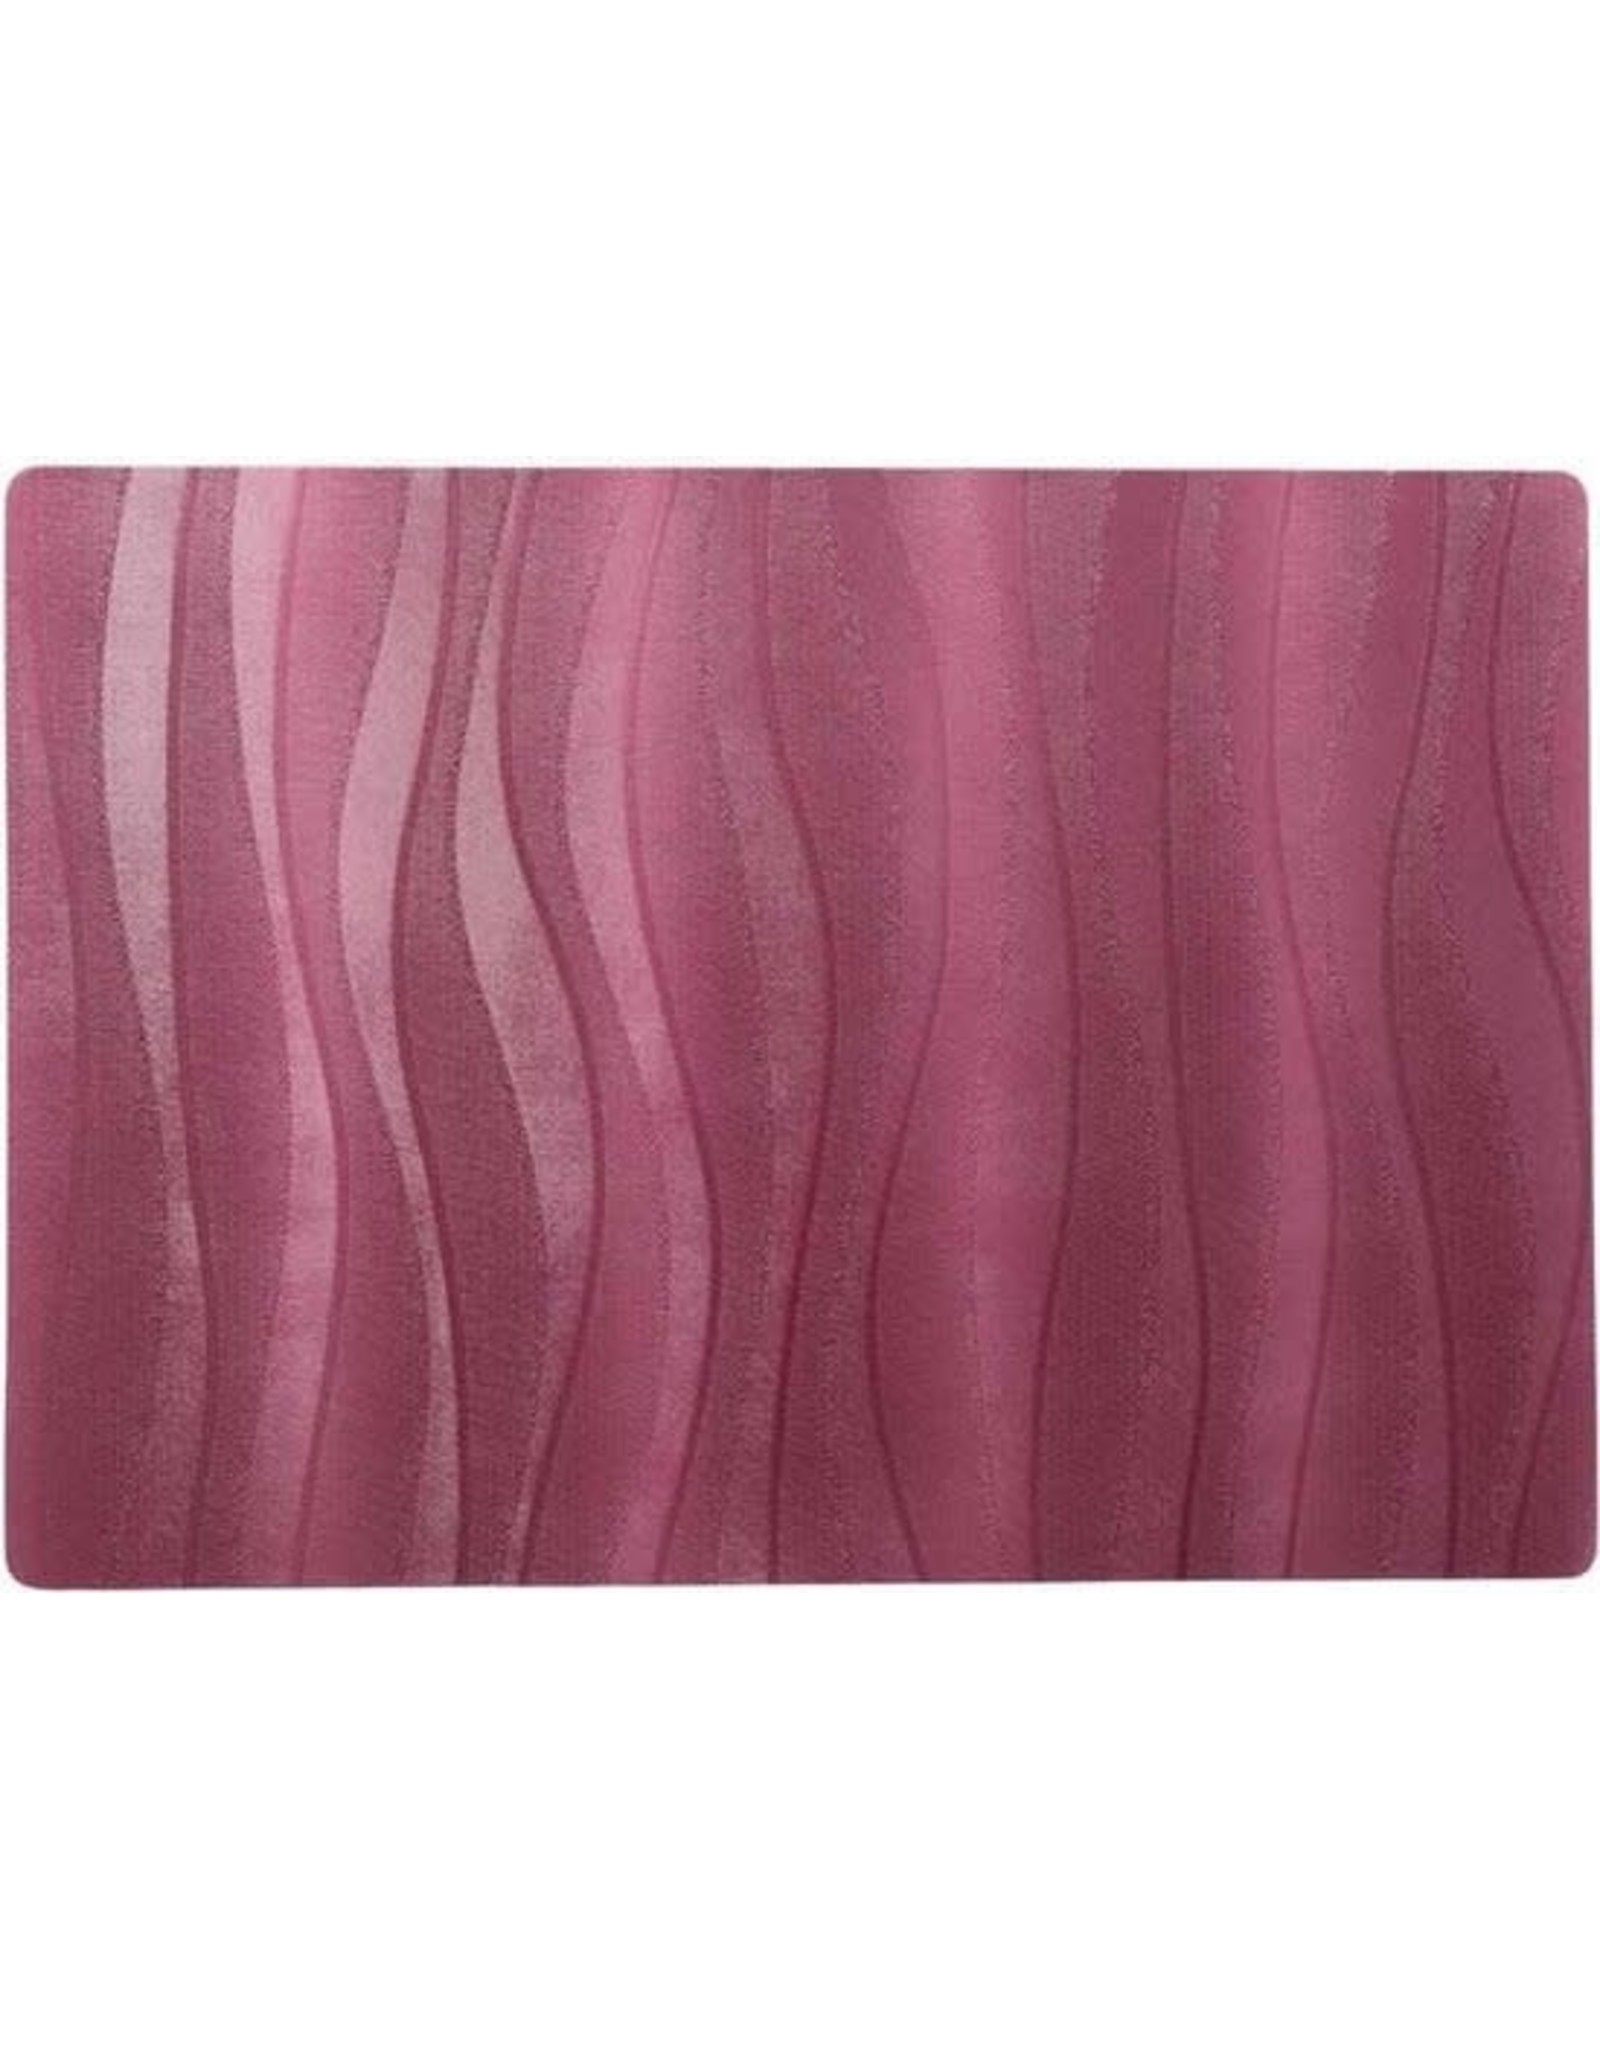 WICOTEX Placemats Onix rood